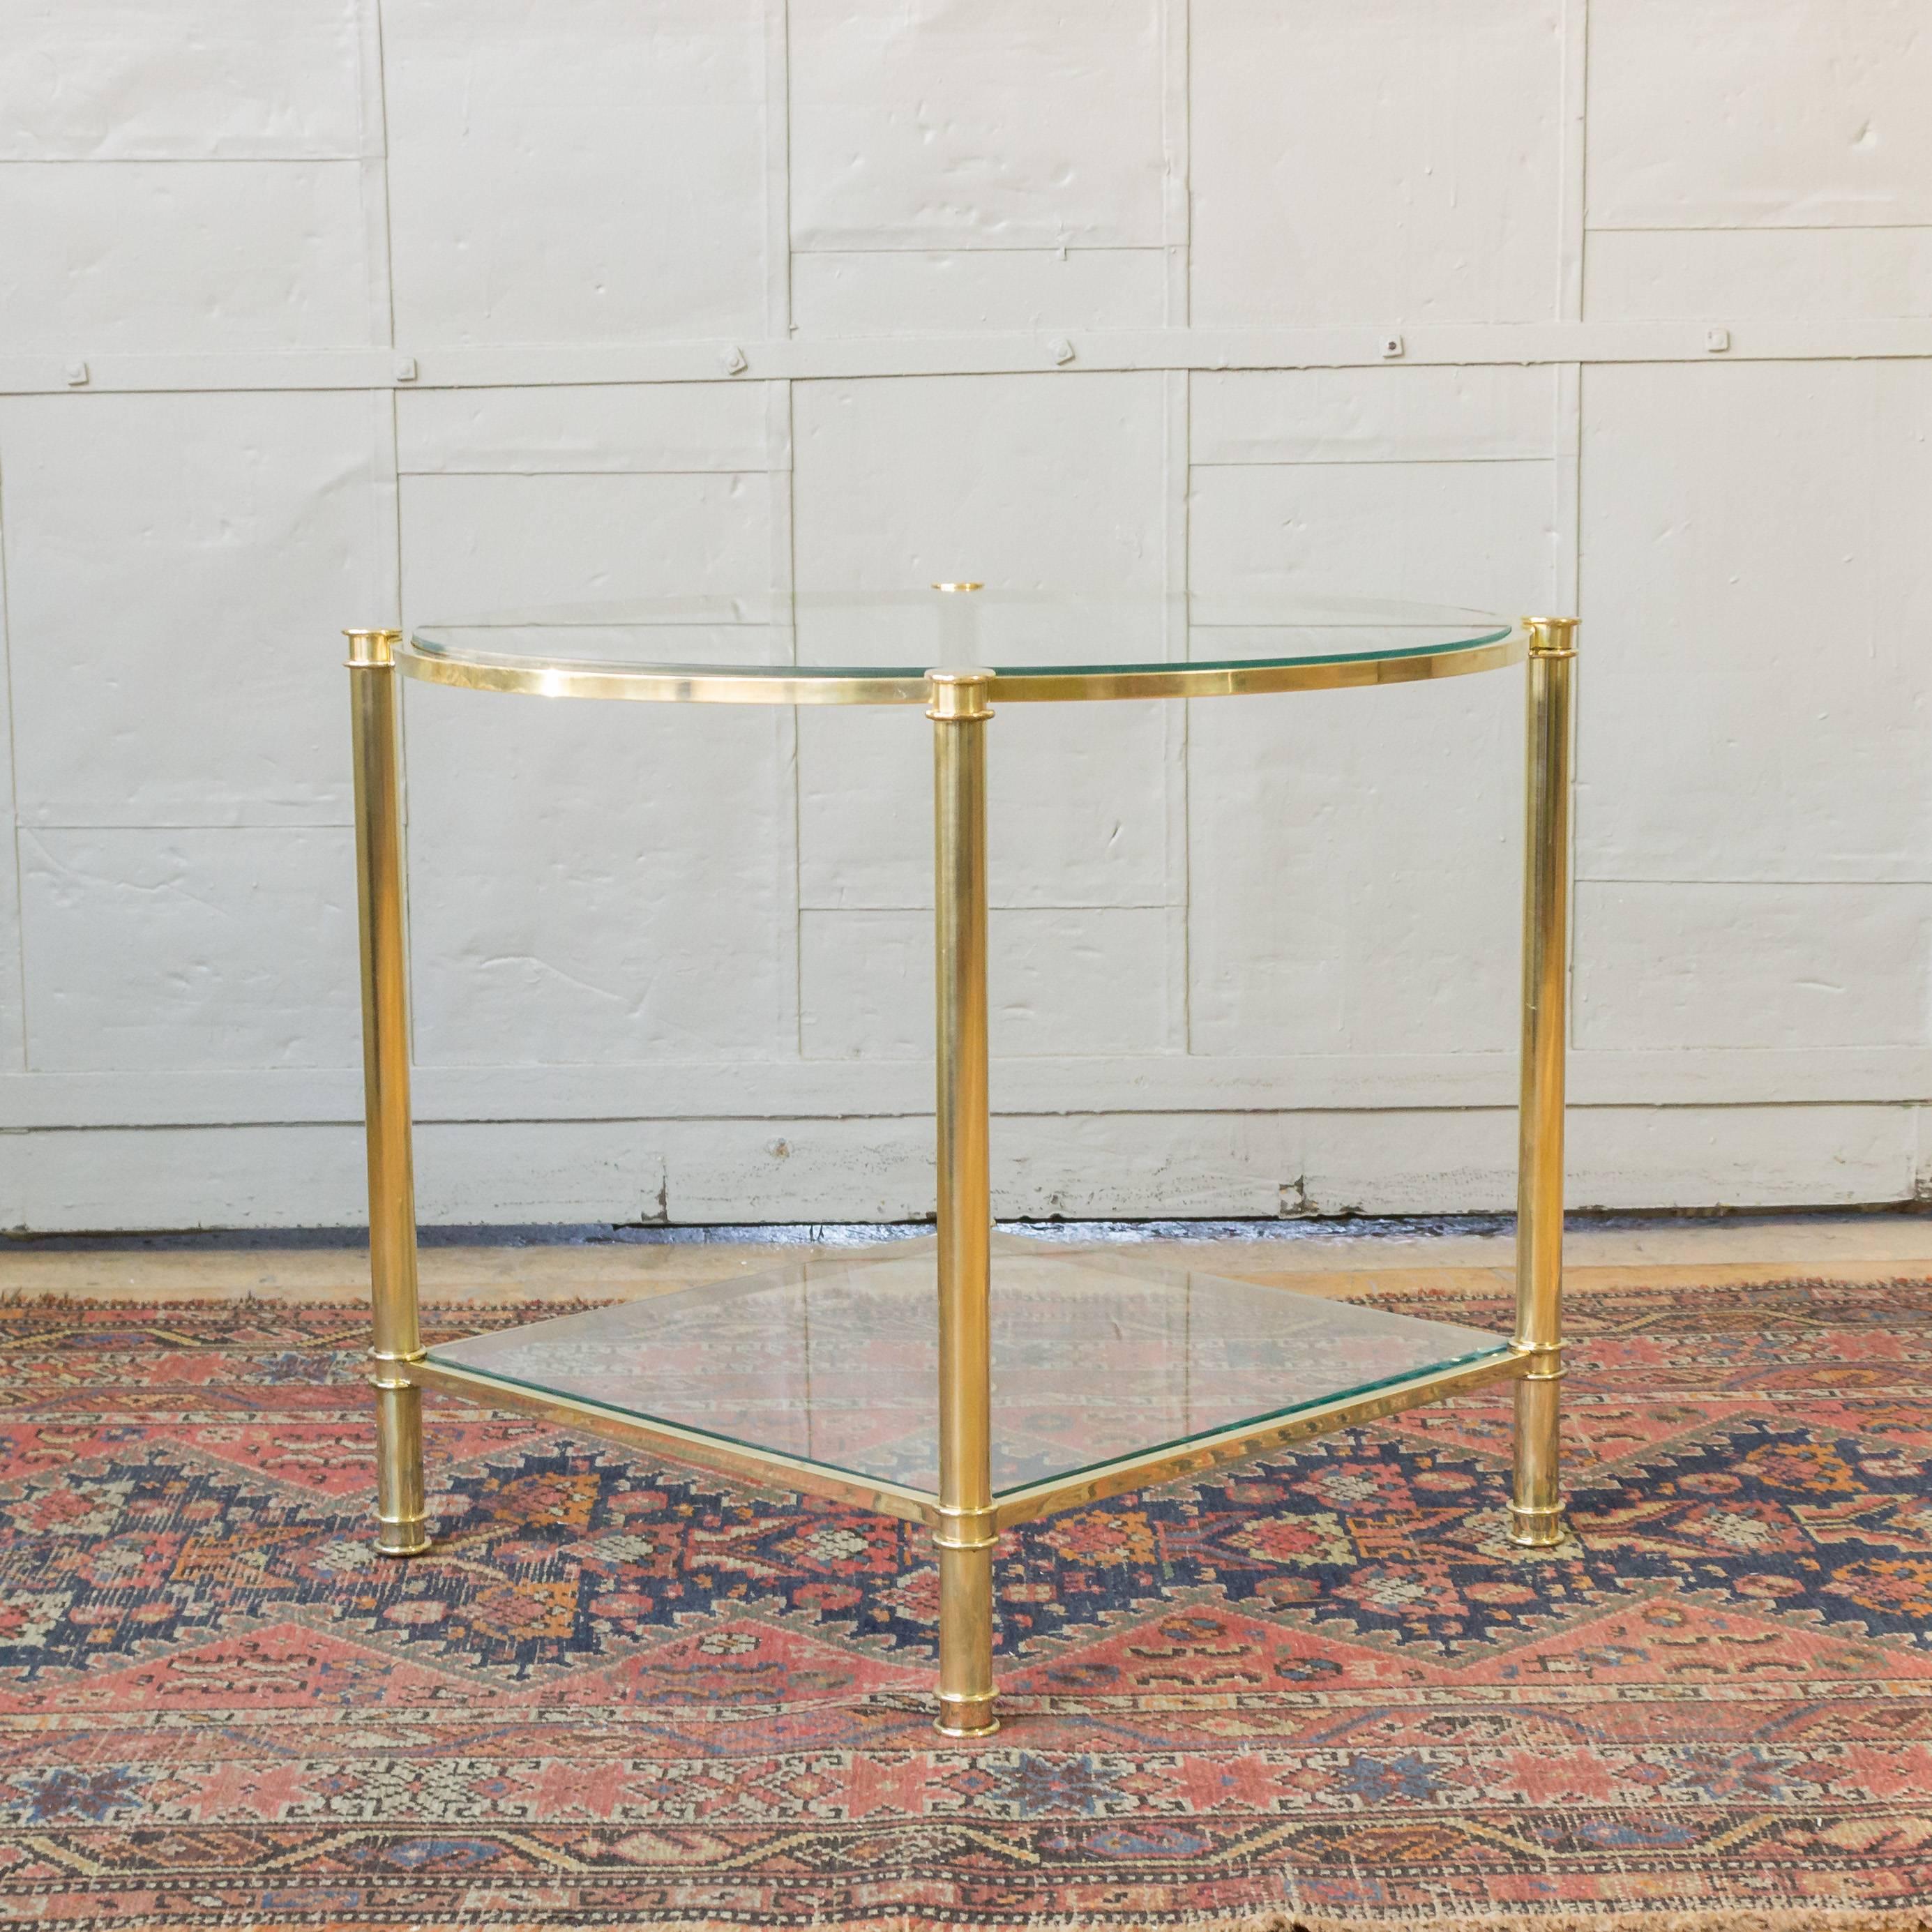 Pair of brass end tables, the top shelves are round and the bottom shelves are square. Made of polished brass and clear glass, French, 1970s.

